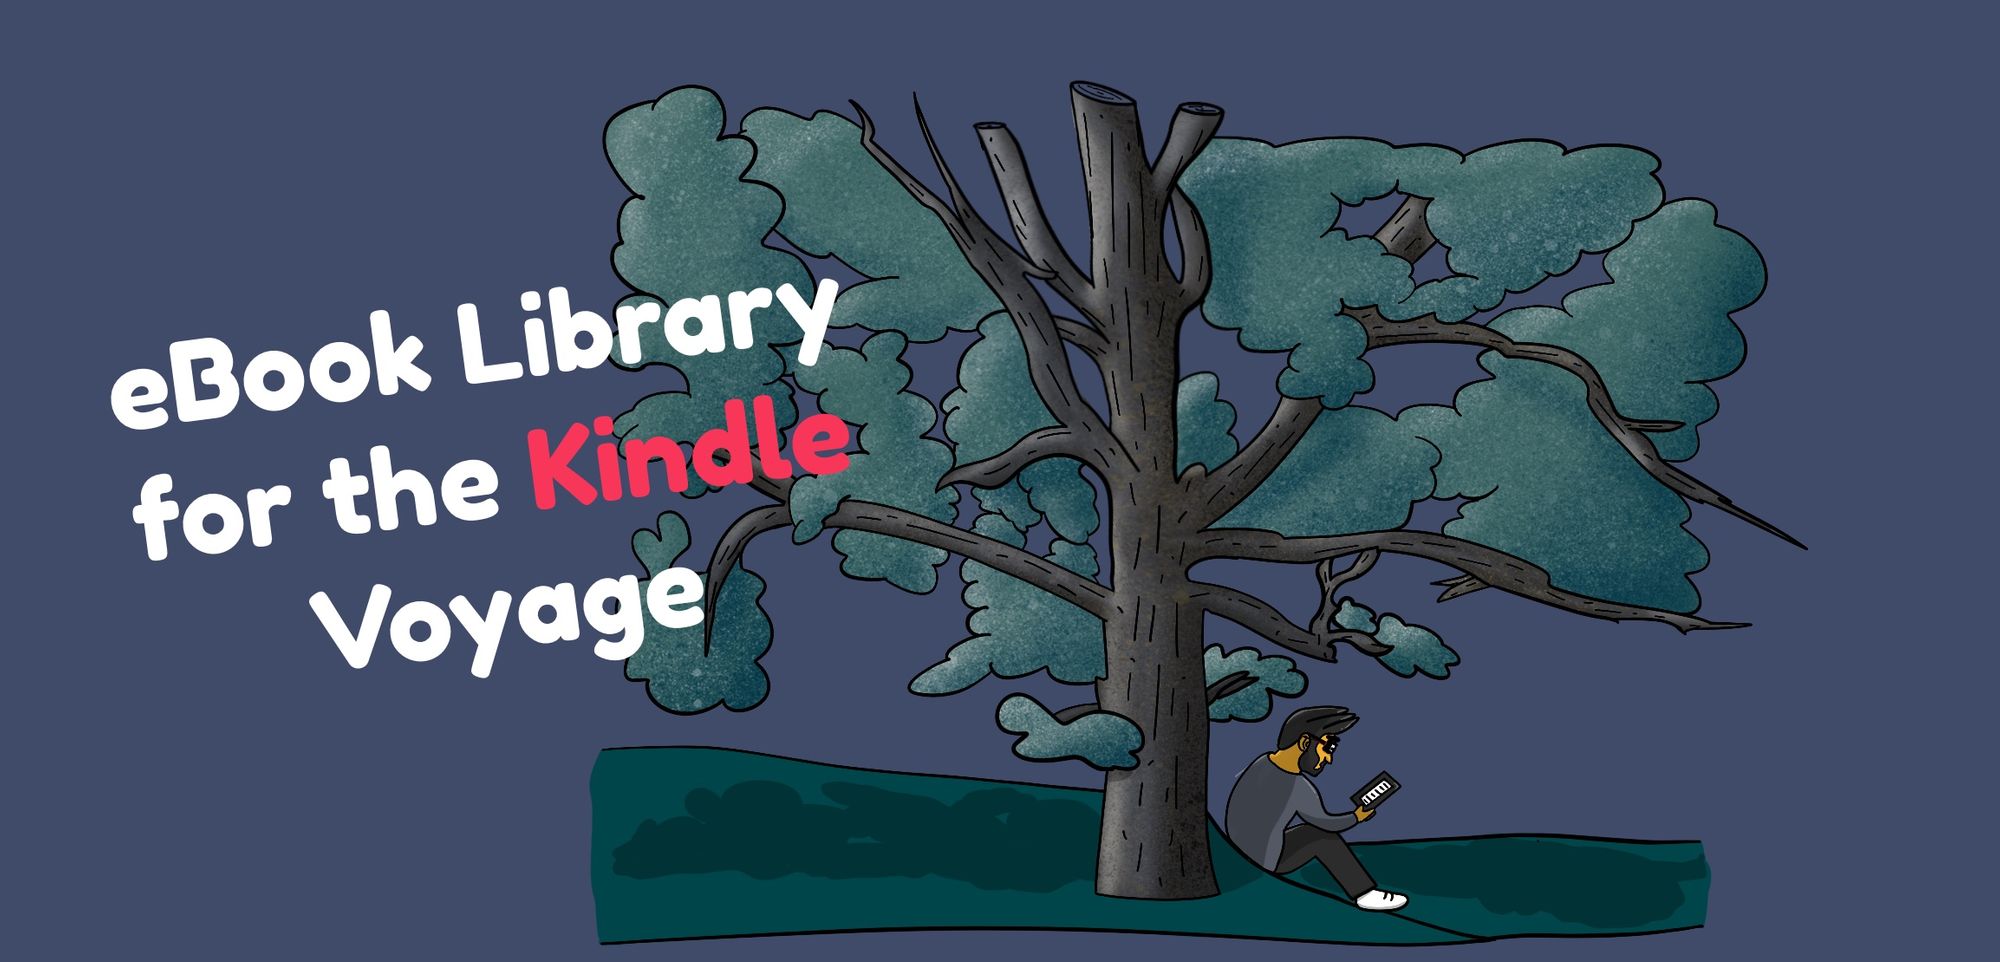 Ebook Library for the Kindle Voyage